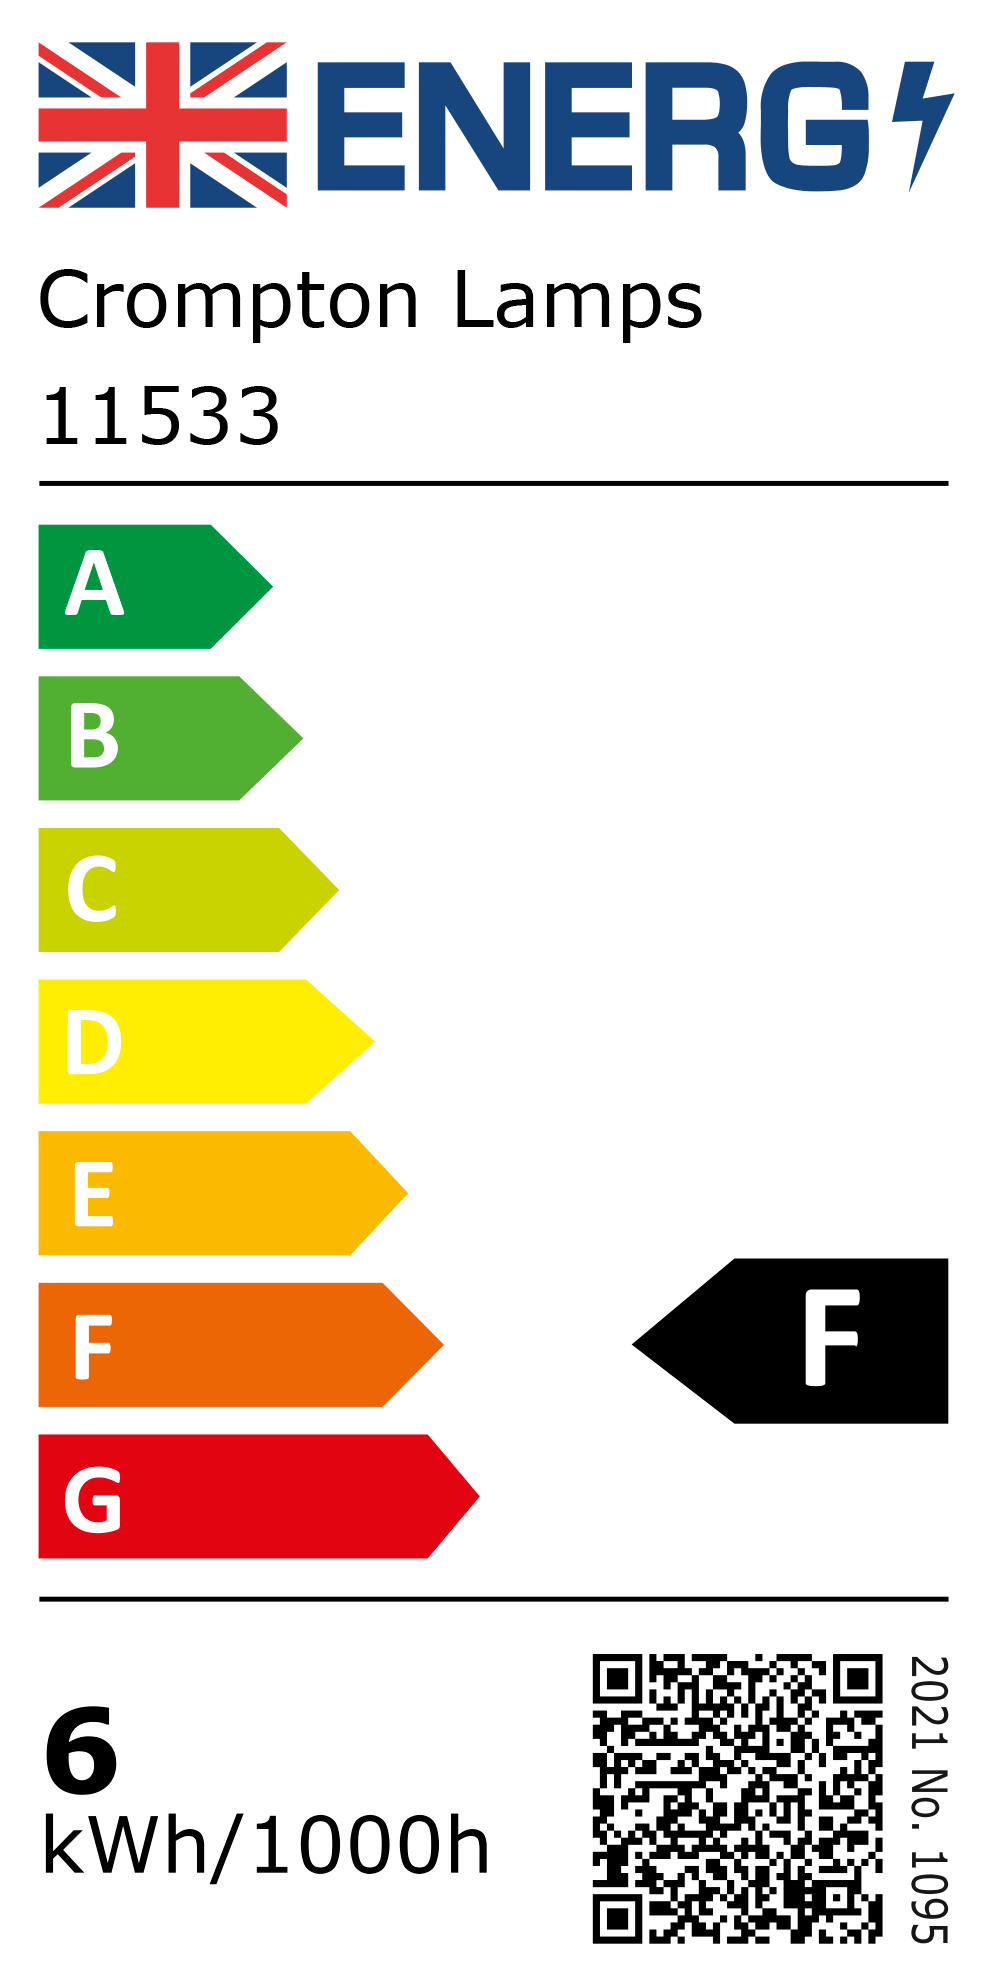 New 2021 Energy Rating Label: Stock Code 11533